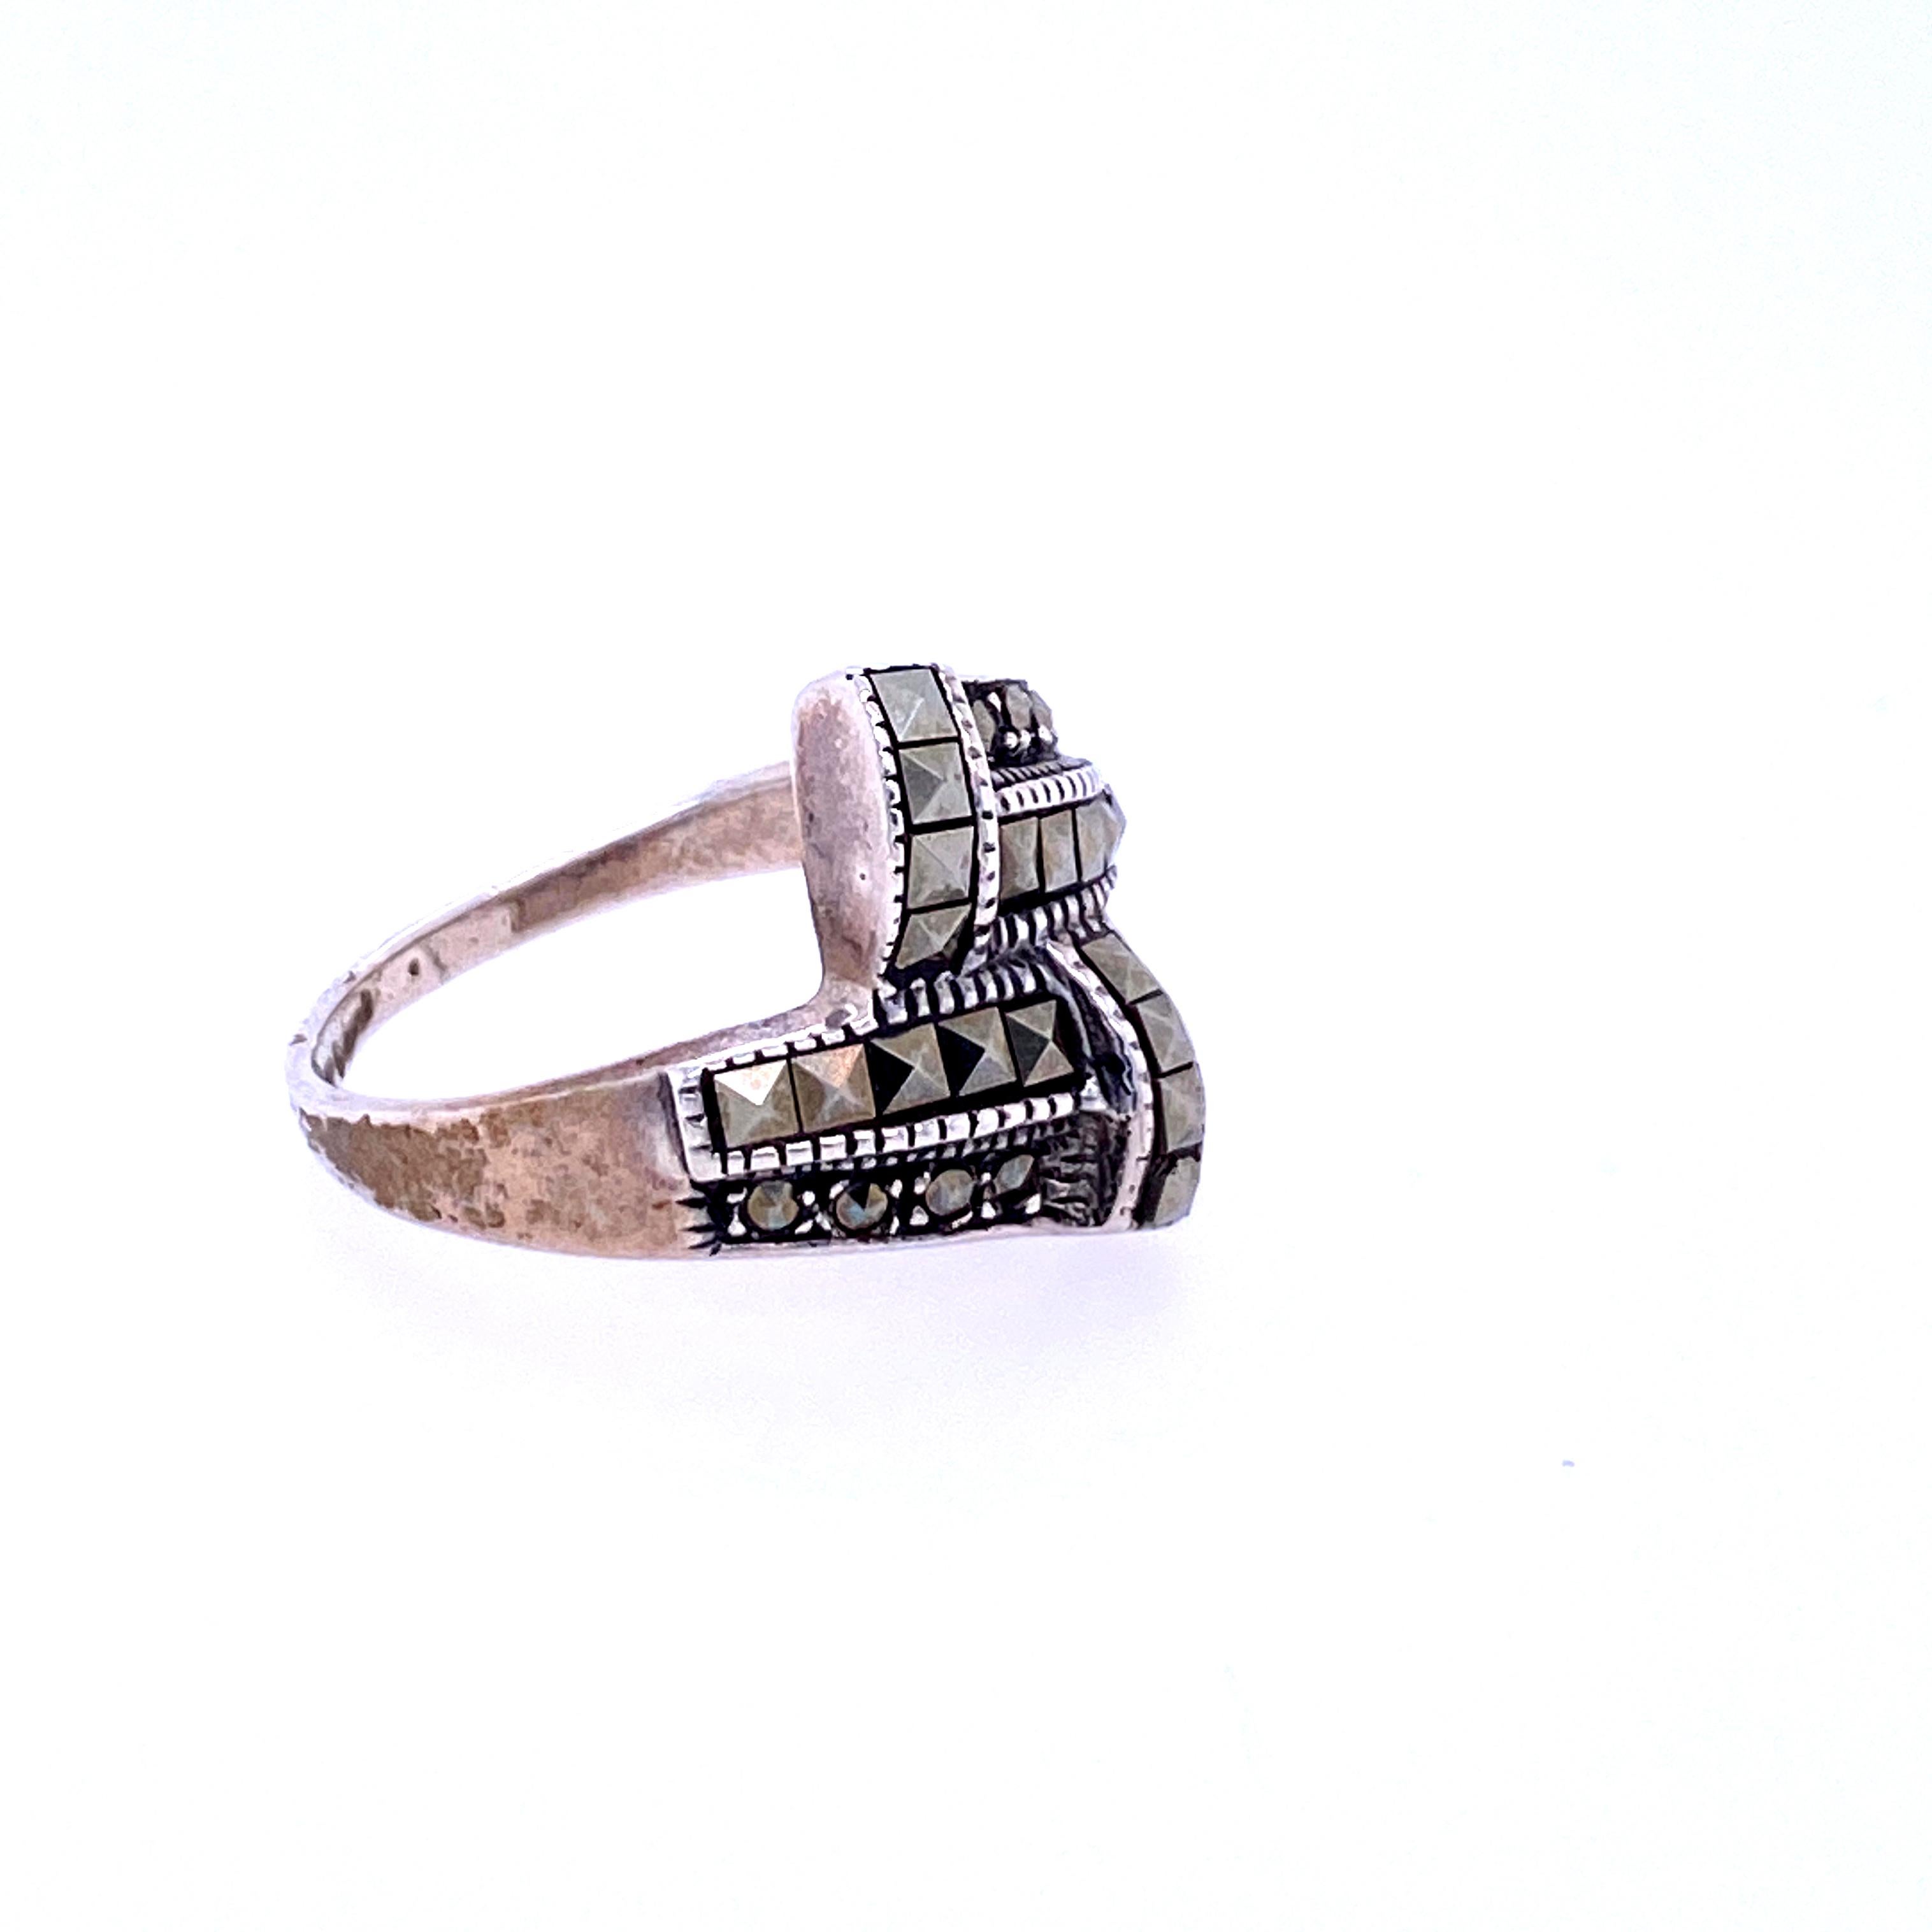 One sterling silver (stamped 925) ring set with eighteen square marcasites and eight round marcasites.  The shank measures 17.2mm near the top of the ring and tapers to 1.9mm at the base.  The ring is a finger size 7.75.